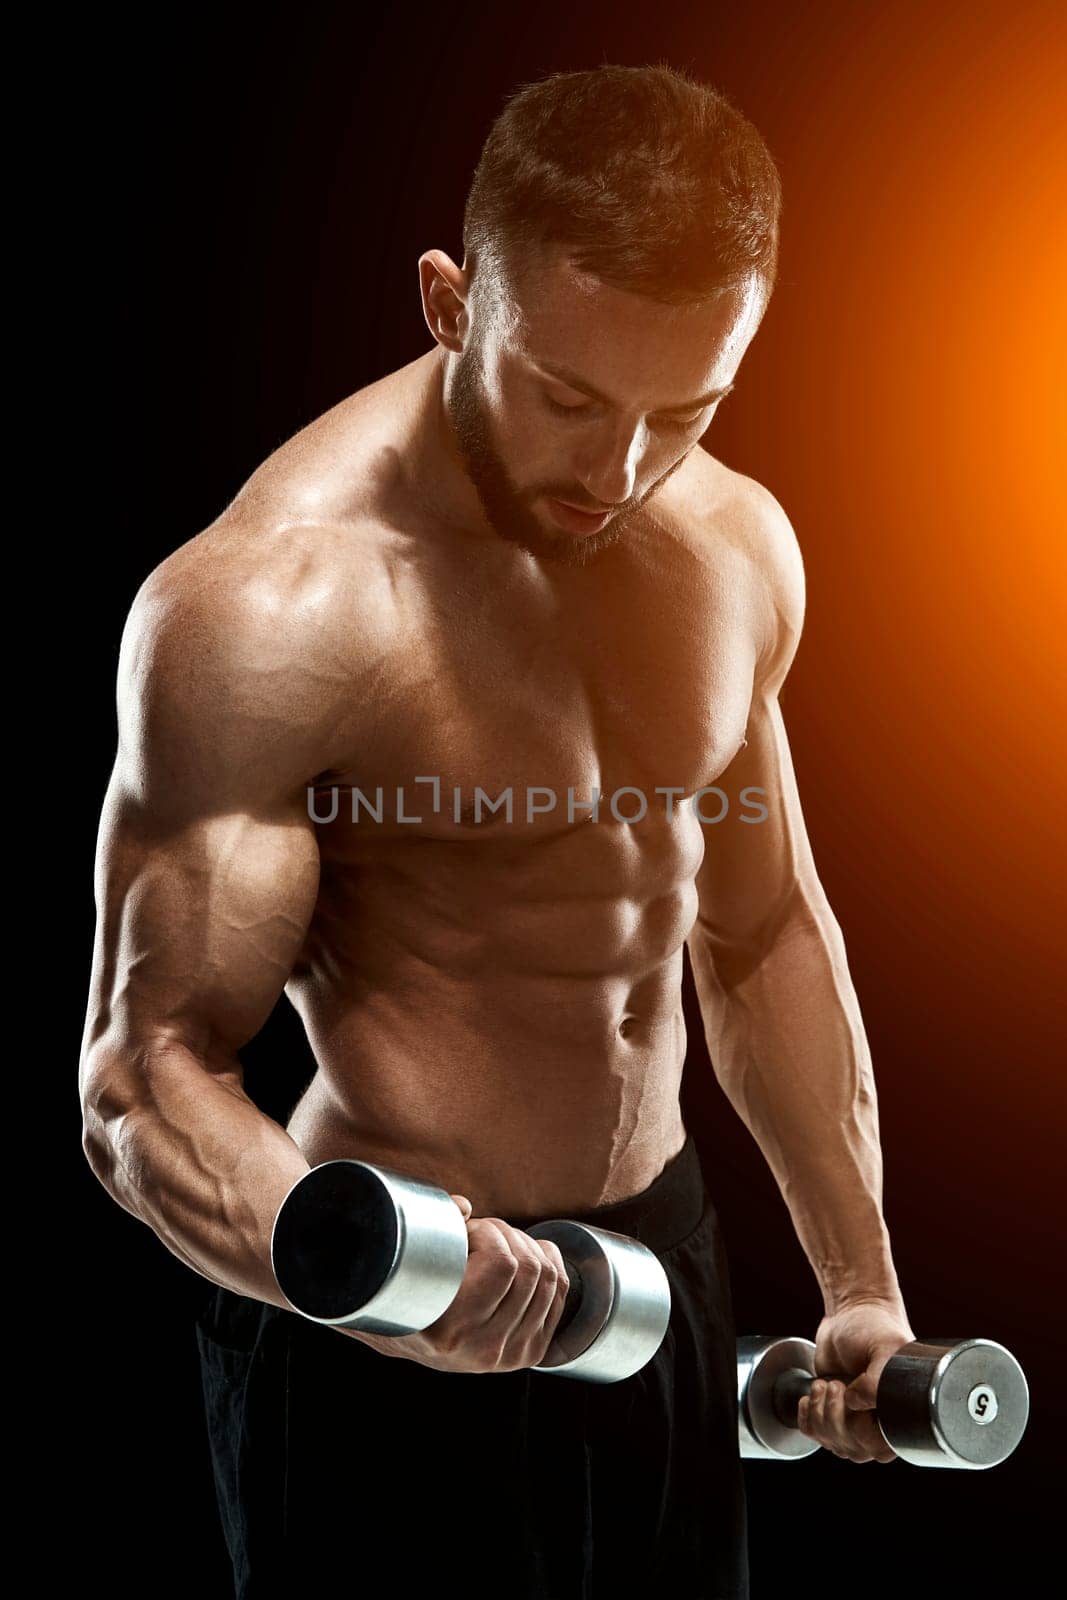 Muscular bodybuilder guy doing posing over black background. dumbbells in his hands. doing exercises. with sun flare